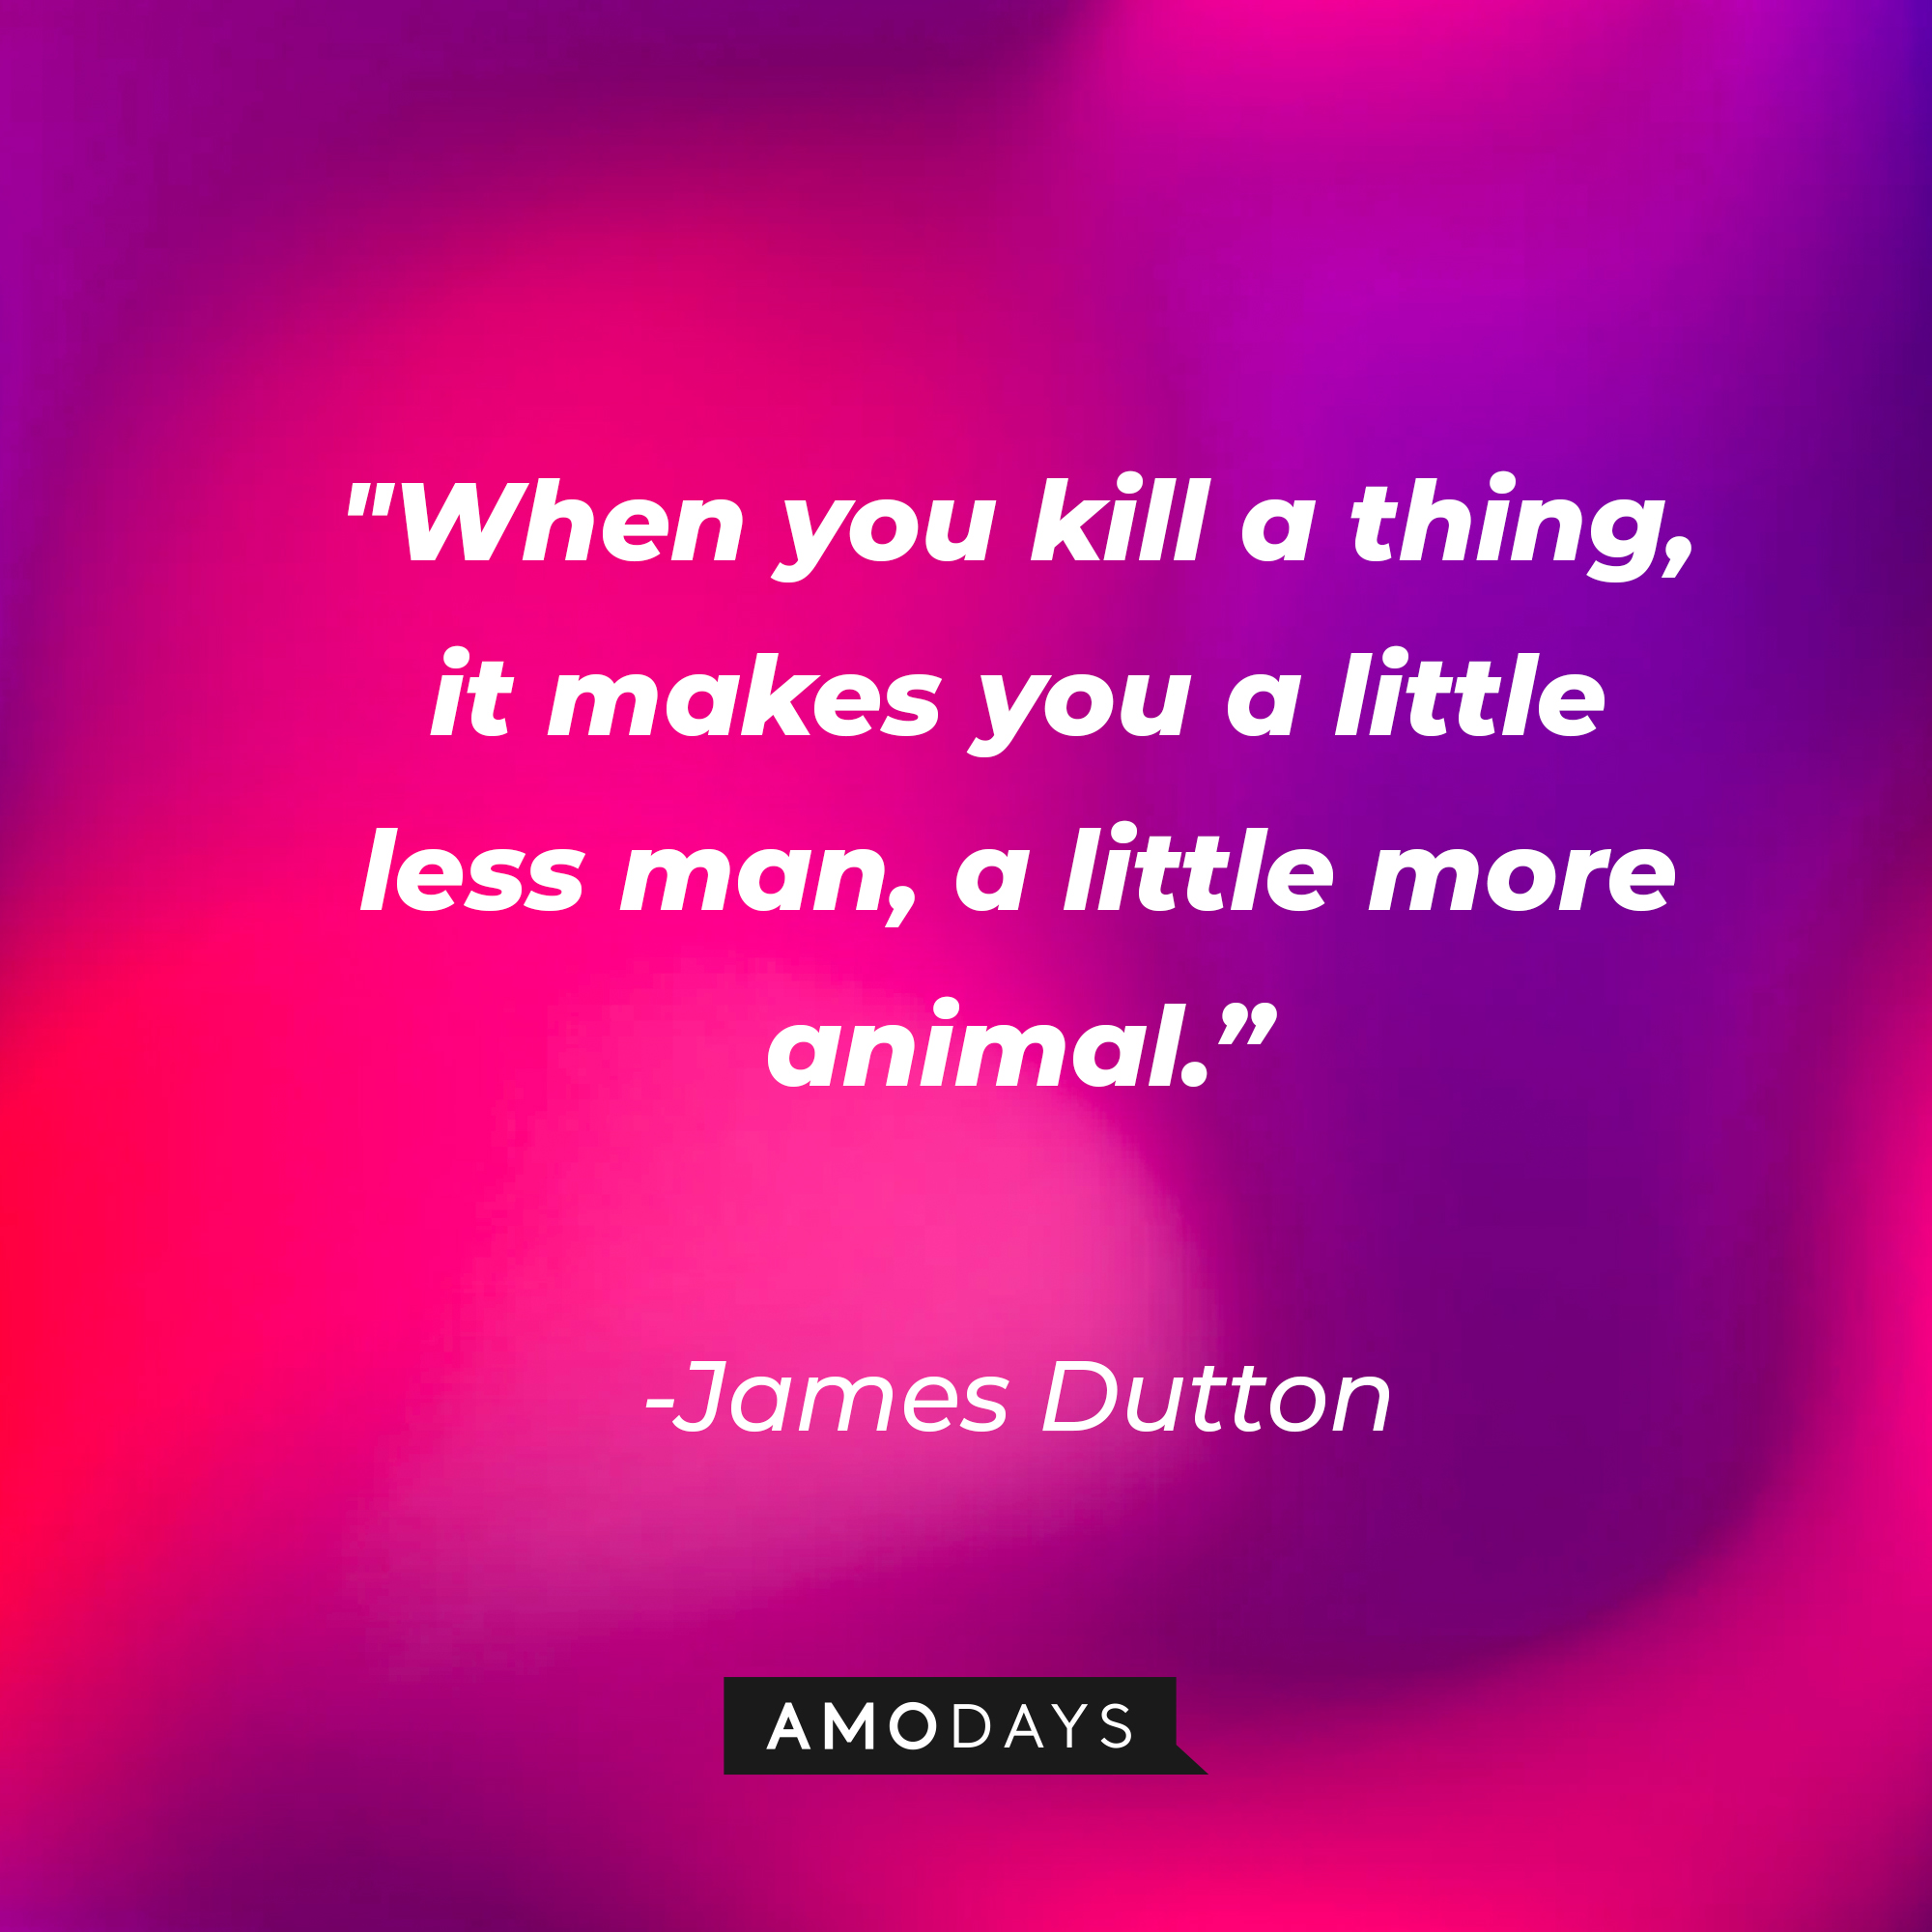 James Dutton’s quote: "When you kill a thing, it makes you a little less man, a little more animal.”  | Source: AmoDays